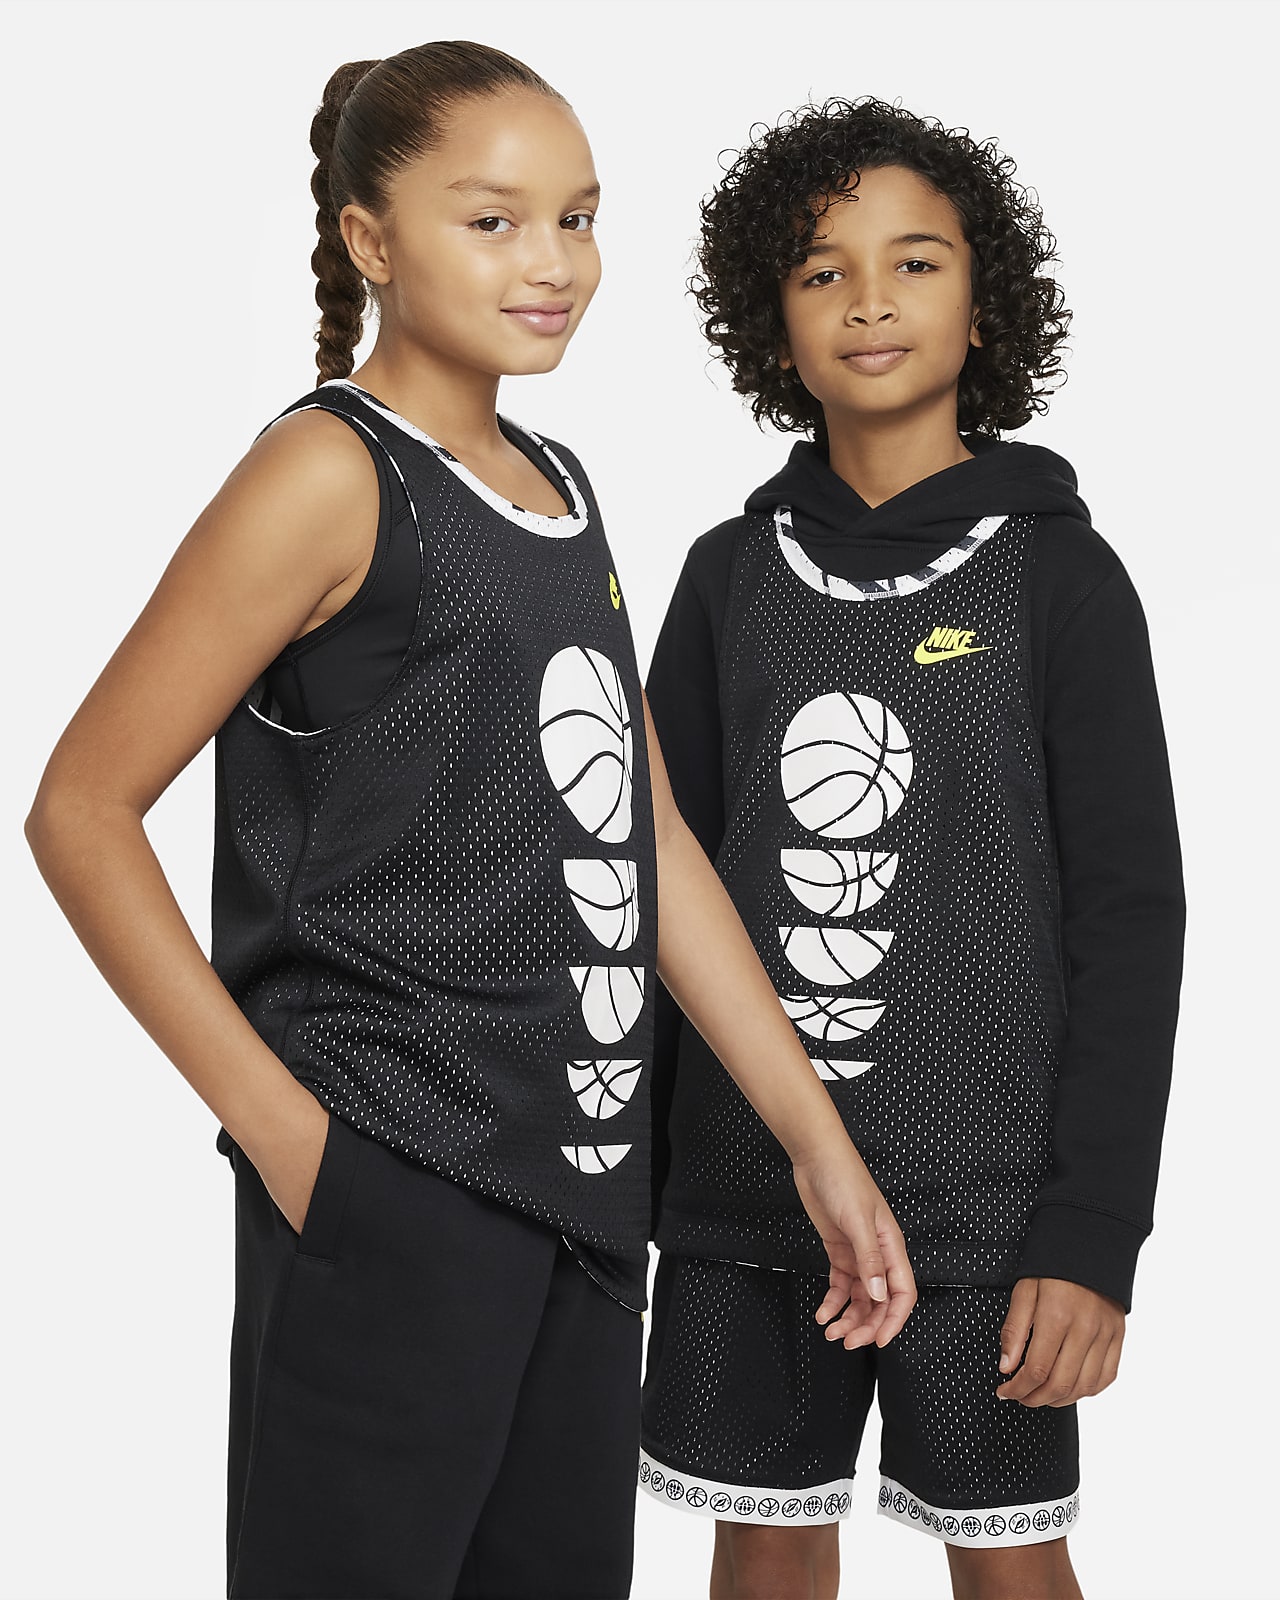  DocModel Basketball Jerseys for Kids Retro Legend Player #8  Youth Basketball Jersey for Boys,3 Year Old Kids Basketball Jersey for  Girls XS Multi : Sports & Outdoors